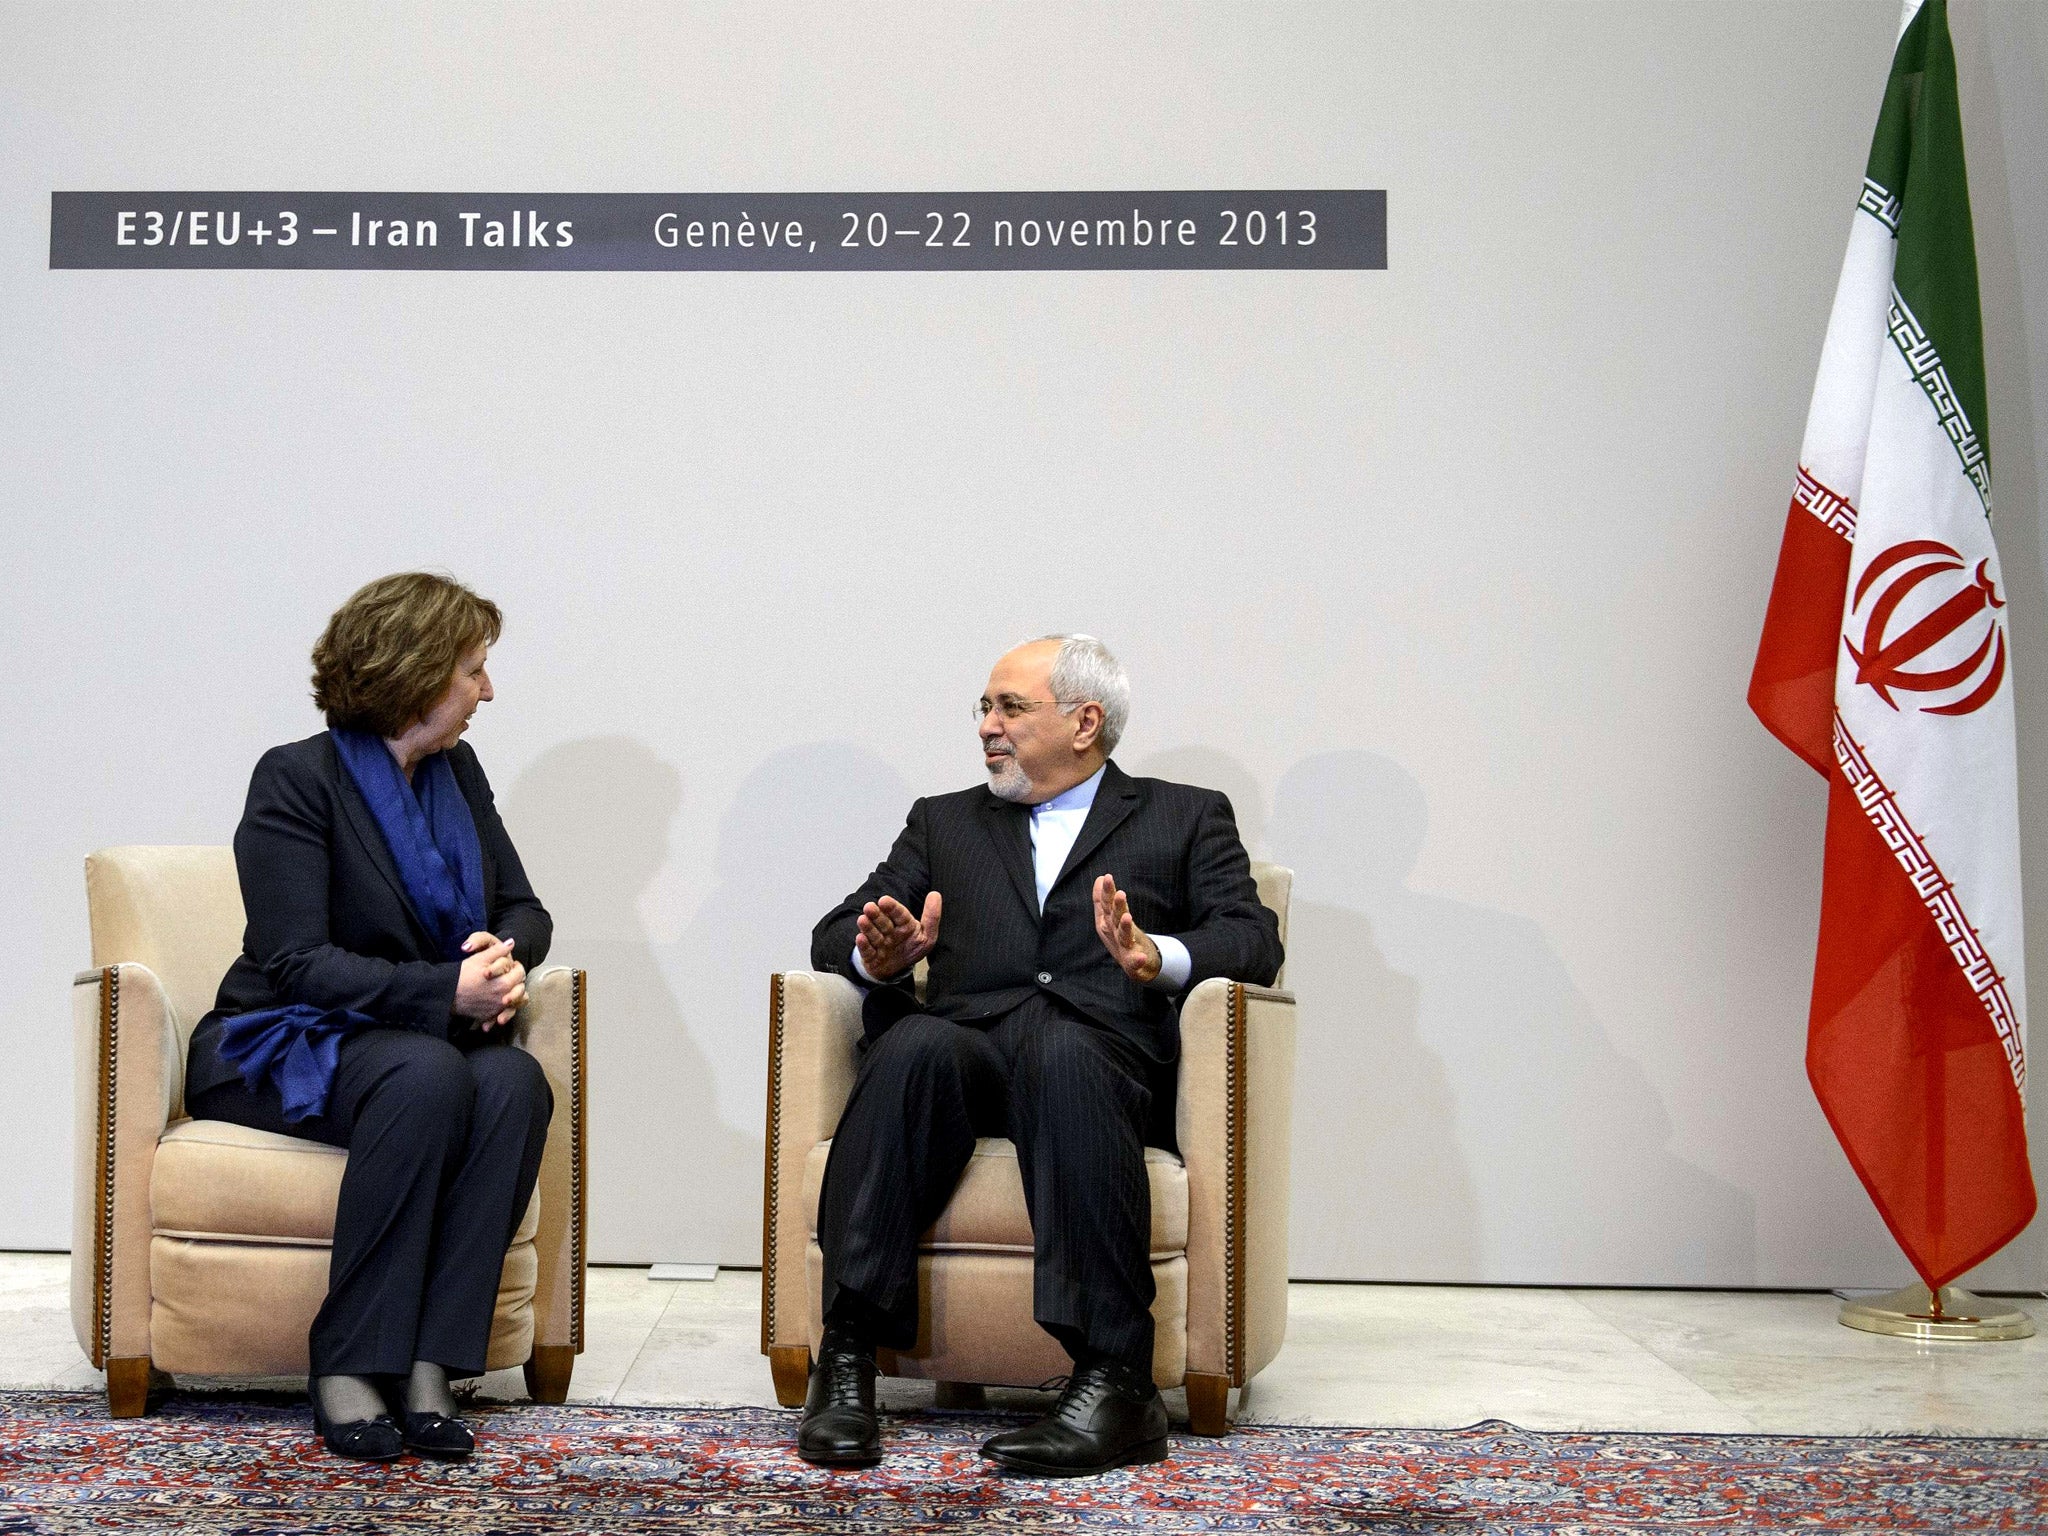 Iran’s Foreign Minister Mohammad Javad Zarif meets EU foreign policy chief Catherine Ashton (Getty)